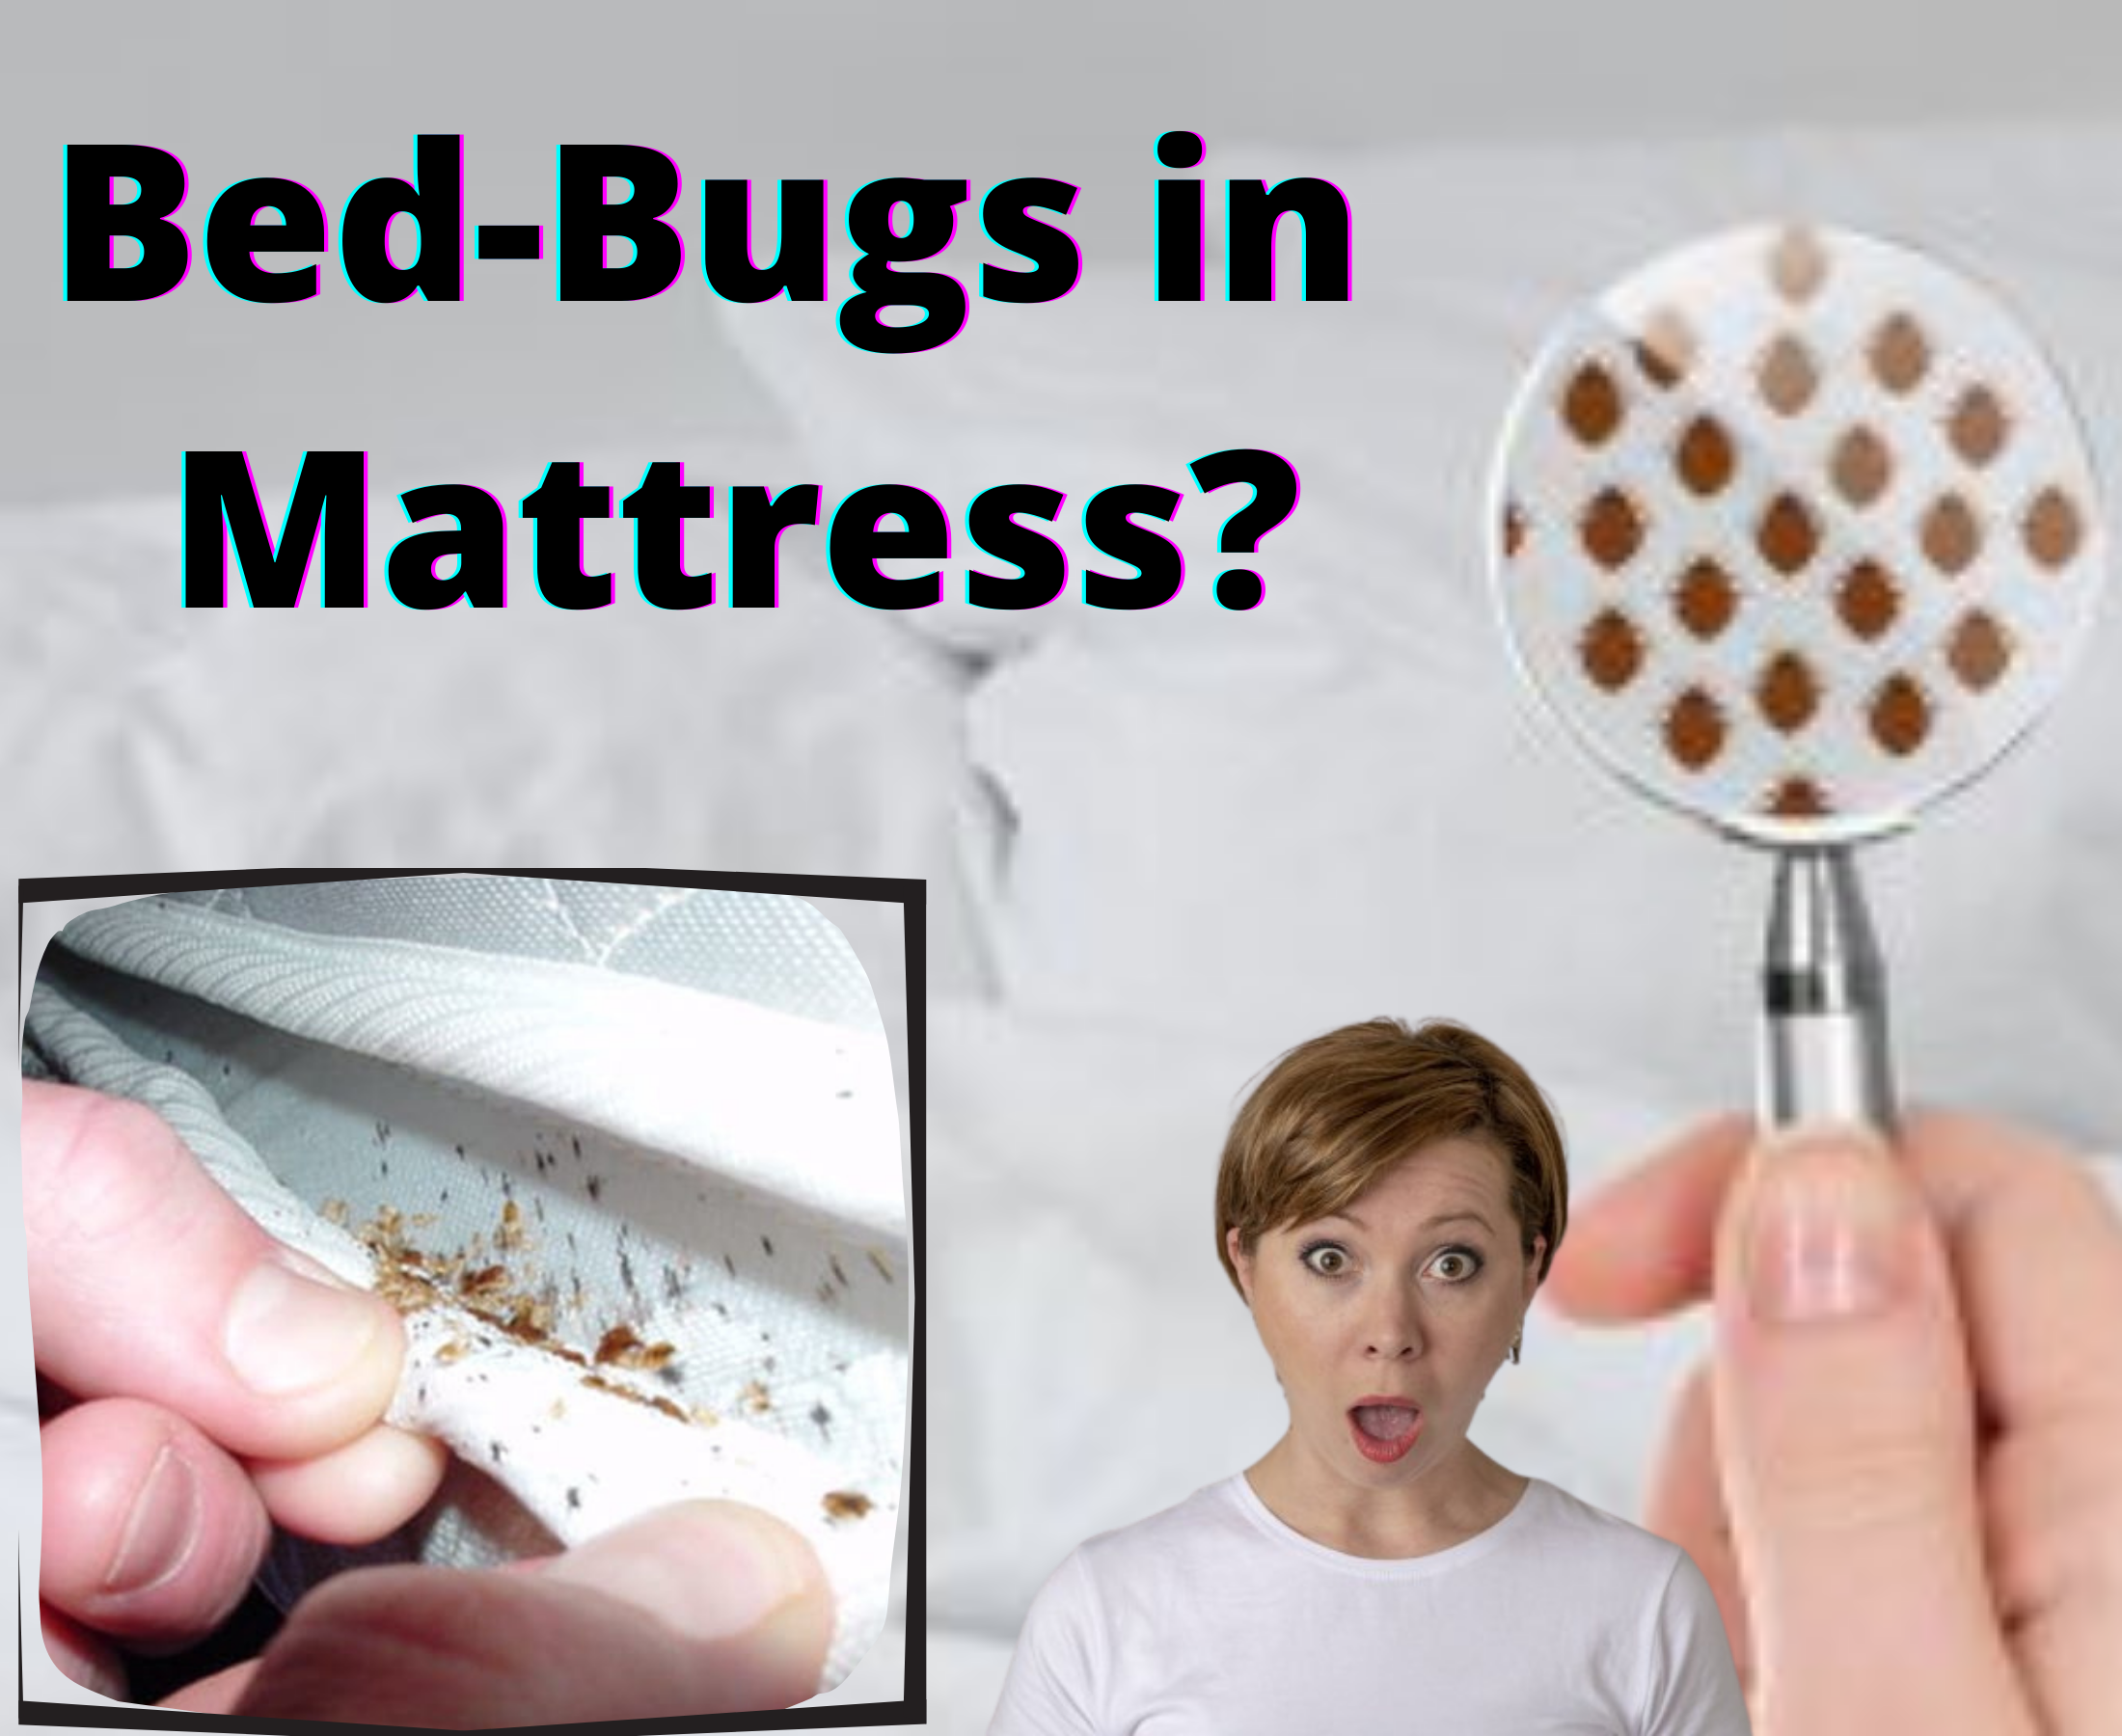 How to get rid of bed bugs in a mattress?